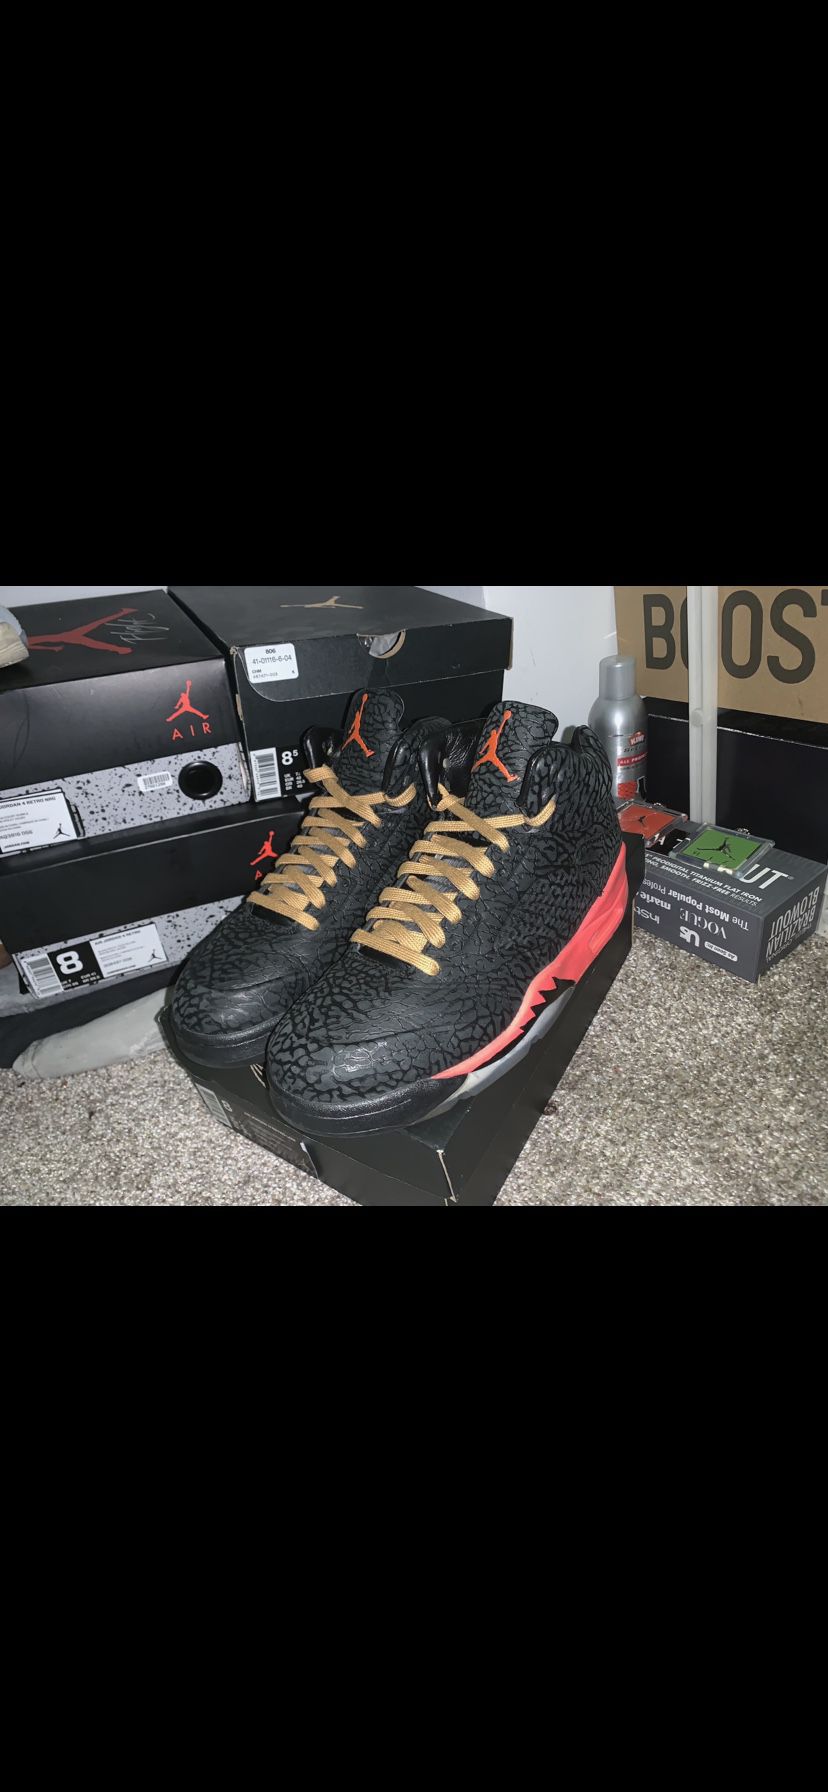 3 lab 5’s size 8 8-10 condition willing to trader or 100cash